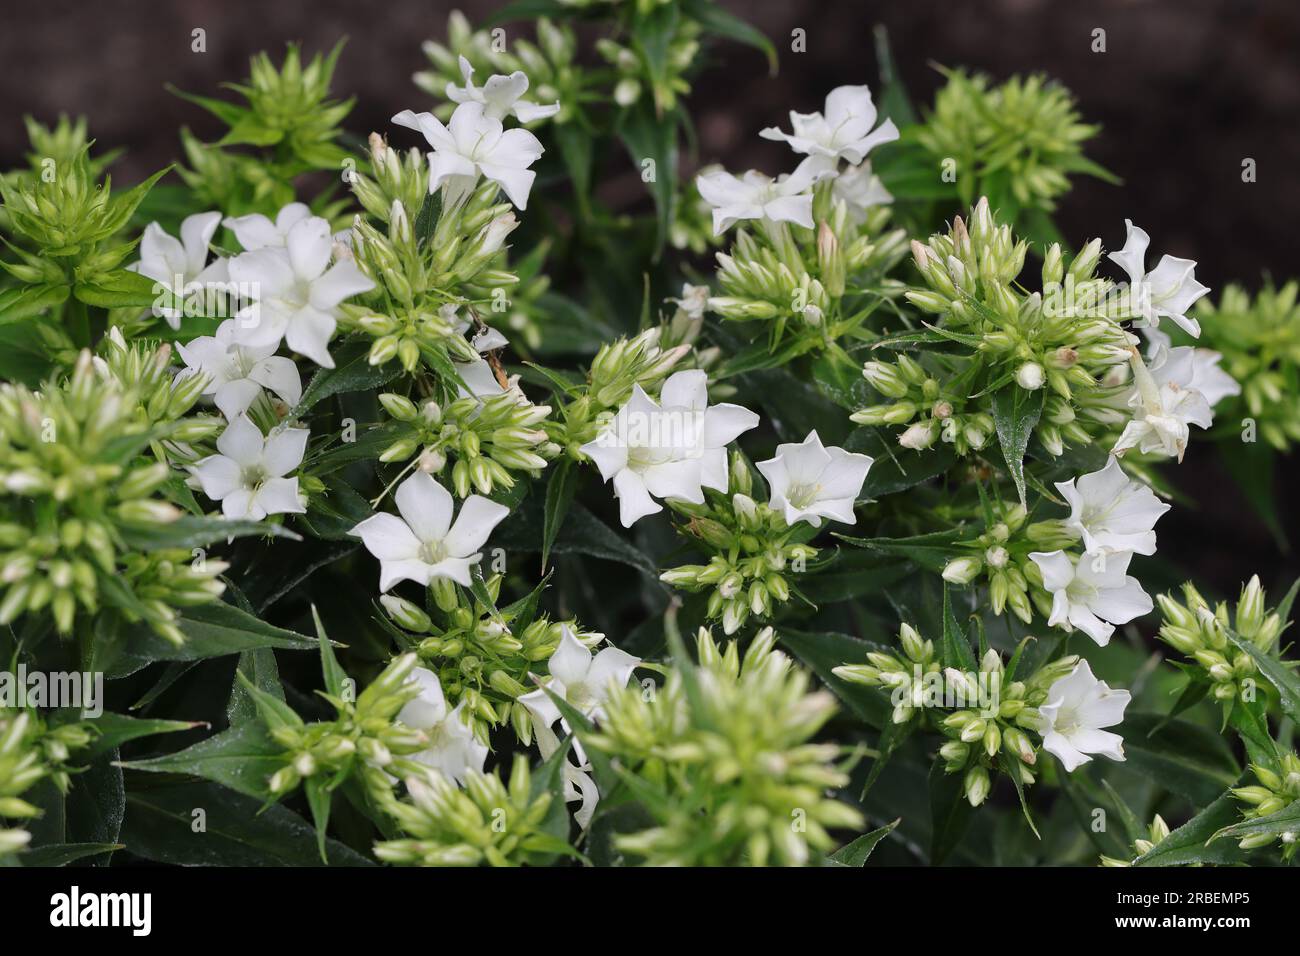 Close-up of white phlox paniculata flowers with many buds on the flower panicles Stock Photo